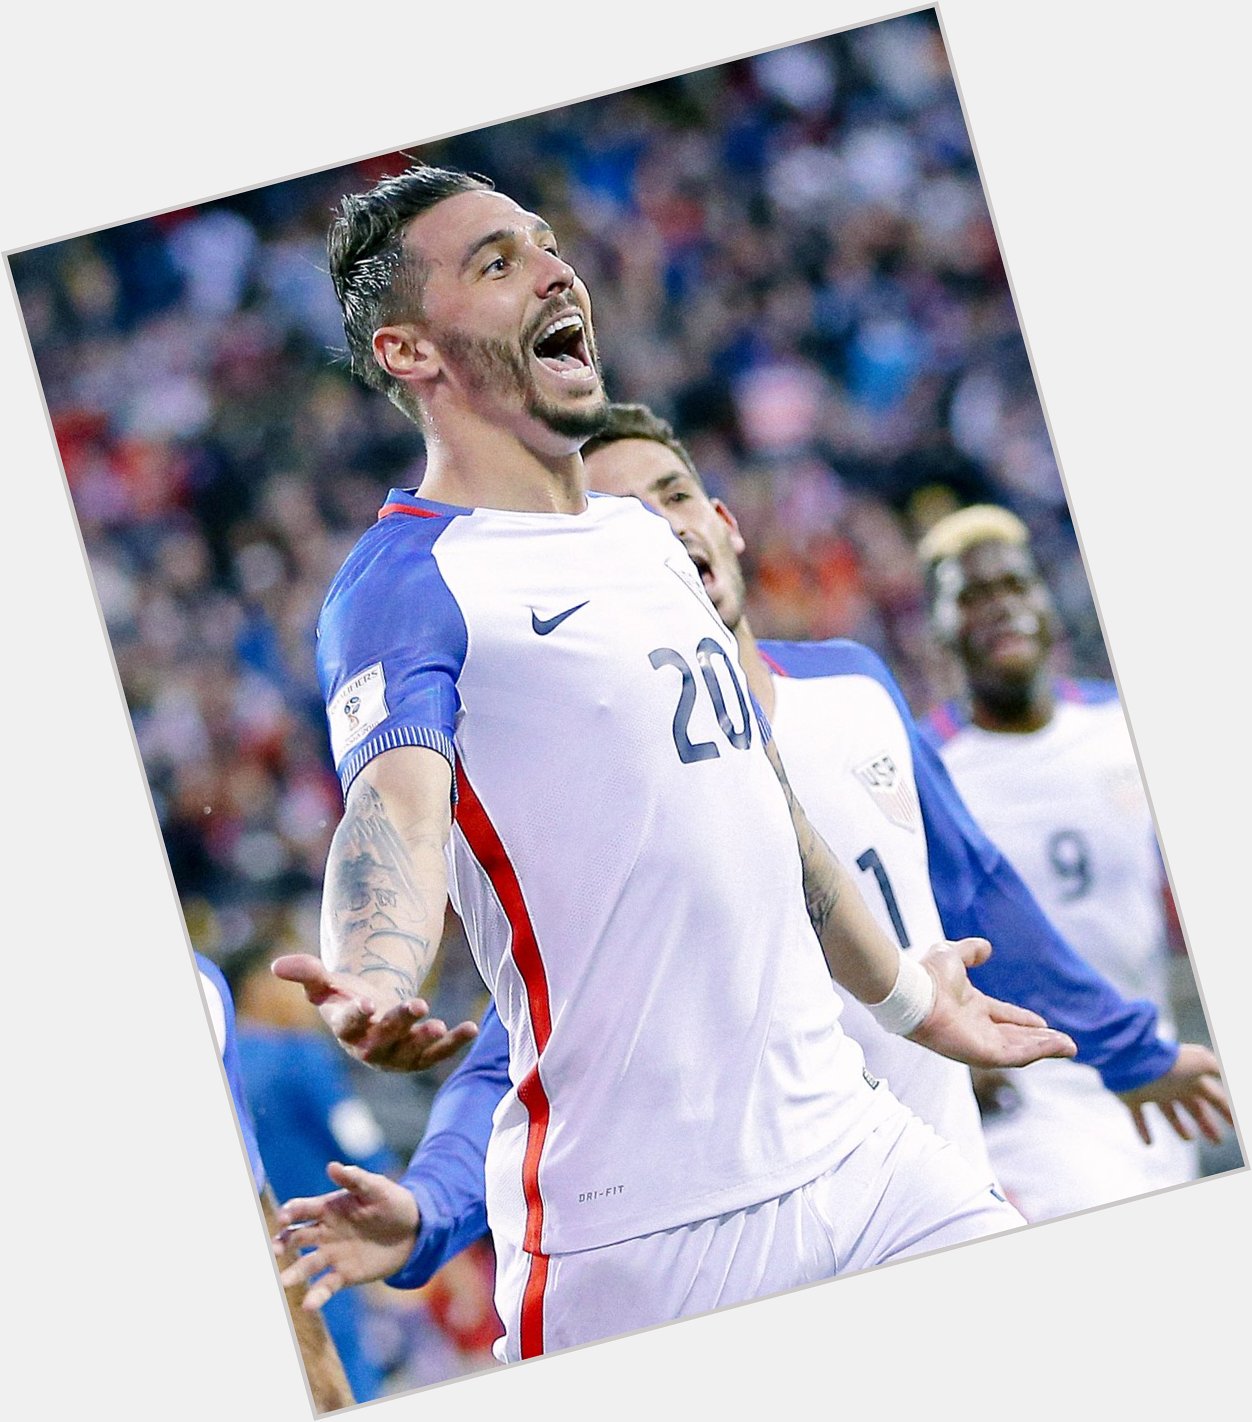 Happy birthday to 2014 World Cup squad member Geoff Cameron! 